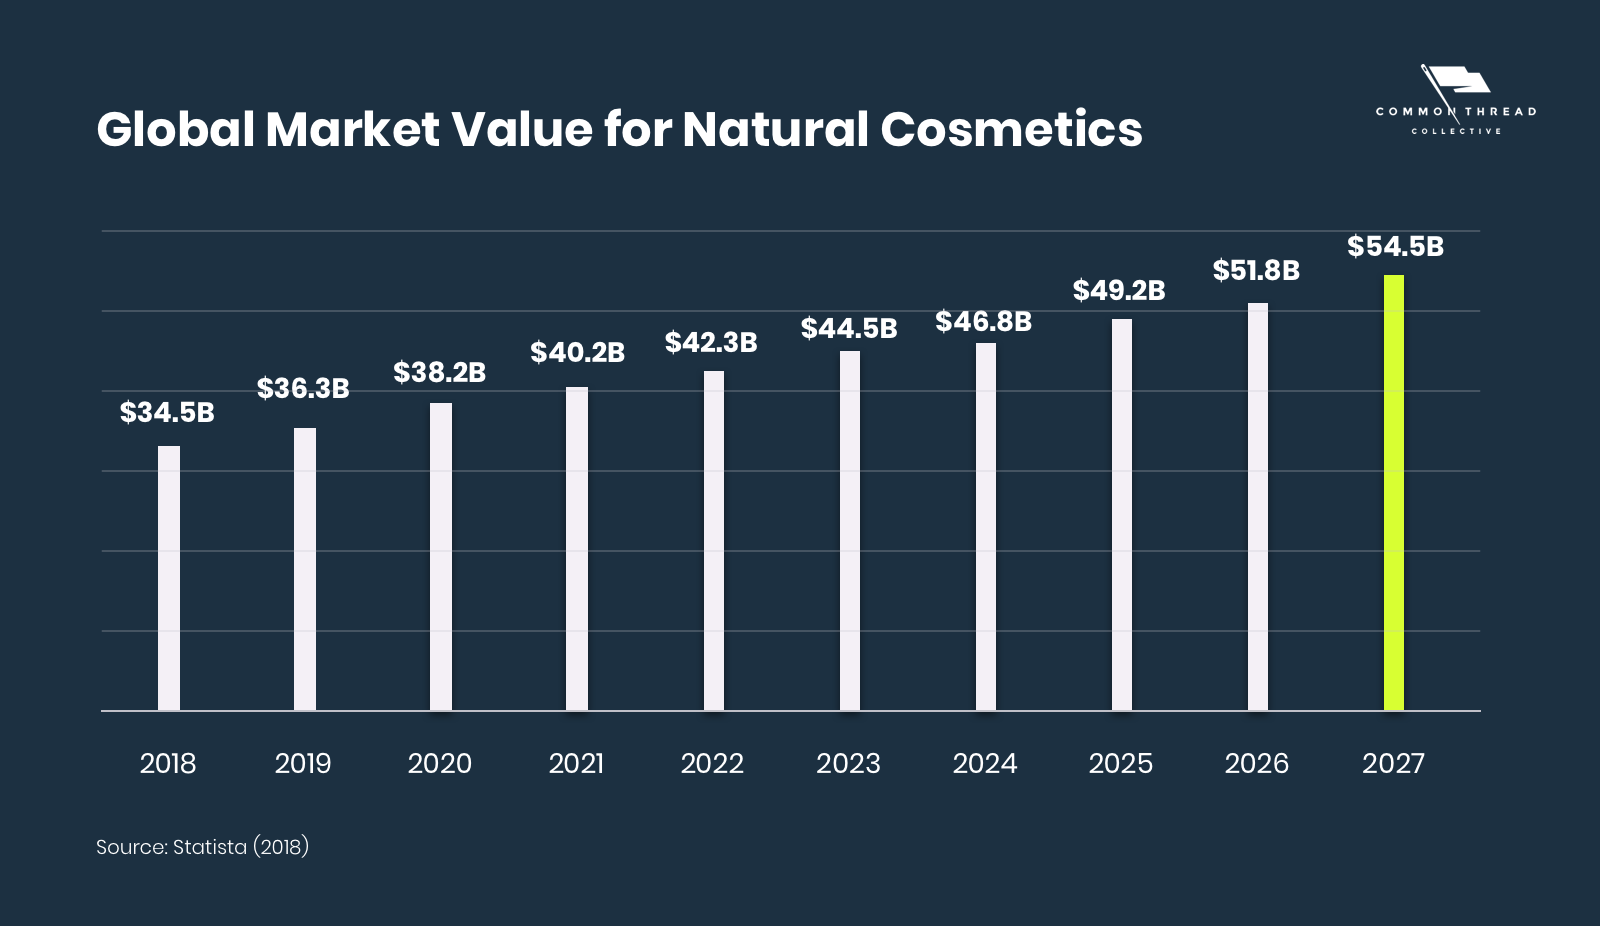 Global Market Value for Natural Cosmetics